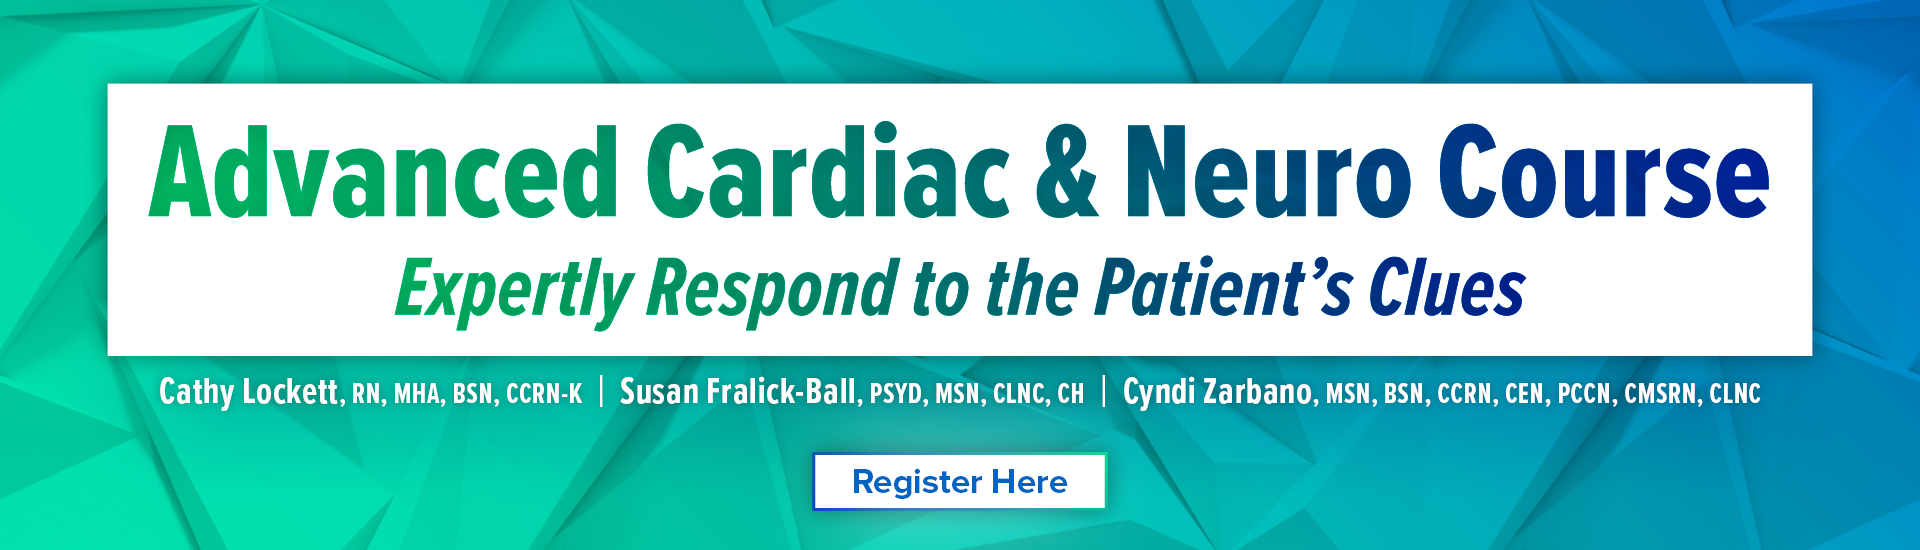 Advanced Cardiac & Neuro Course: Expertly Respond to the Patient’s Clues